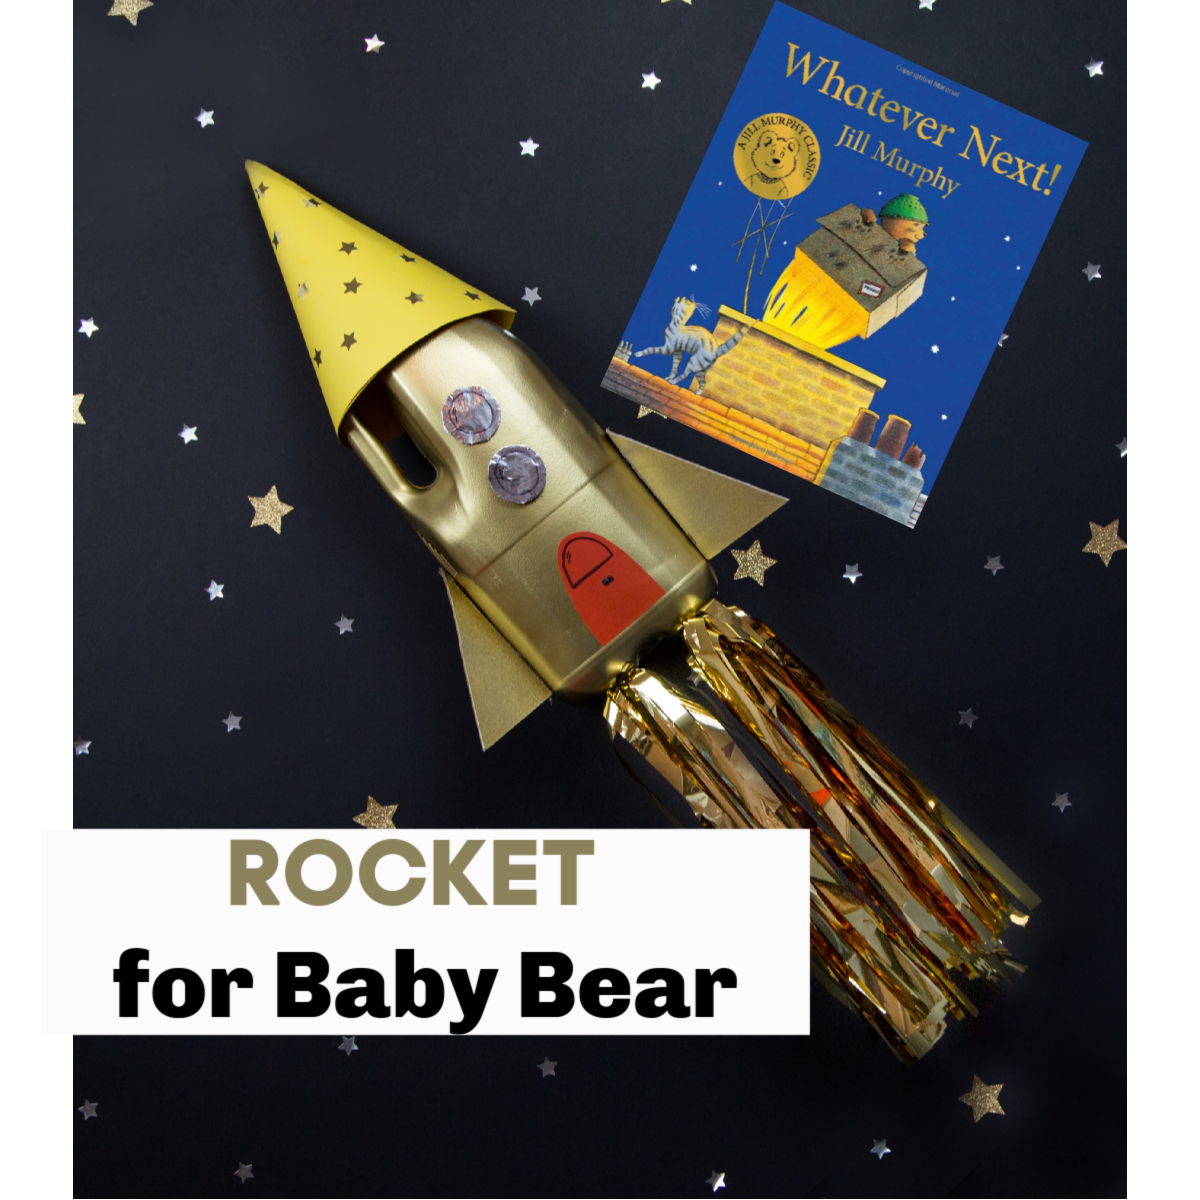 Whatever Next Activity for kids - make a rocket mouse